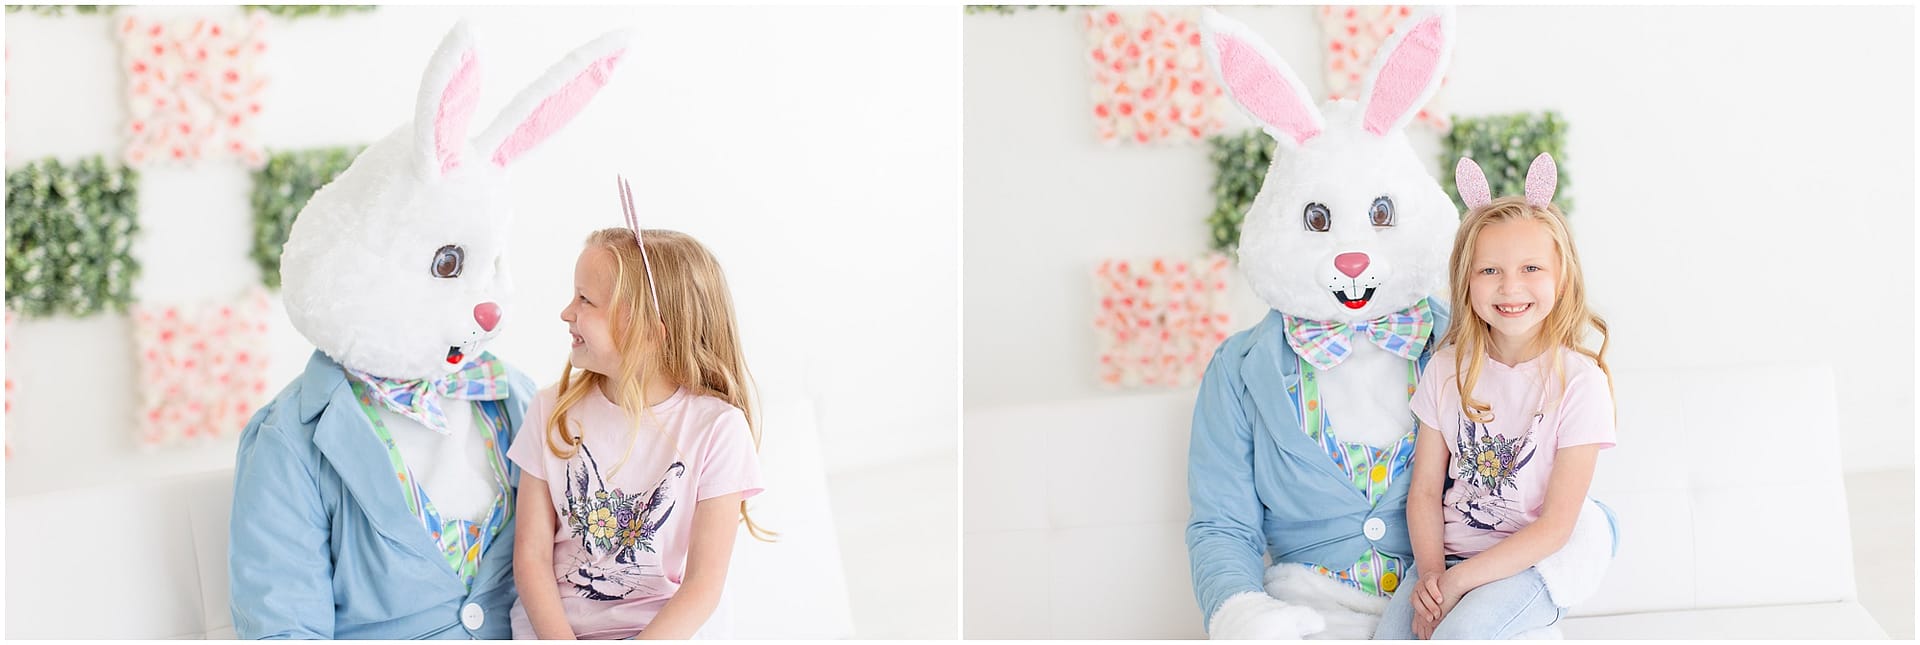 Little girl sits and chats with the Easter Bunny. Photo by Tiffany Hix Photography.